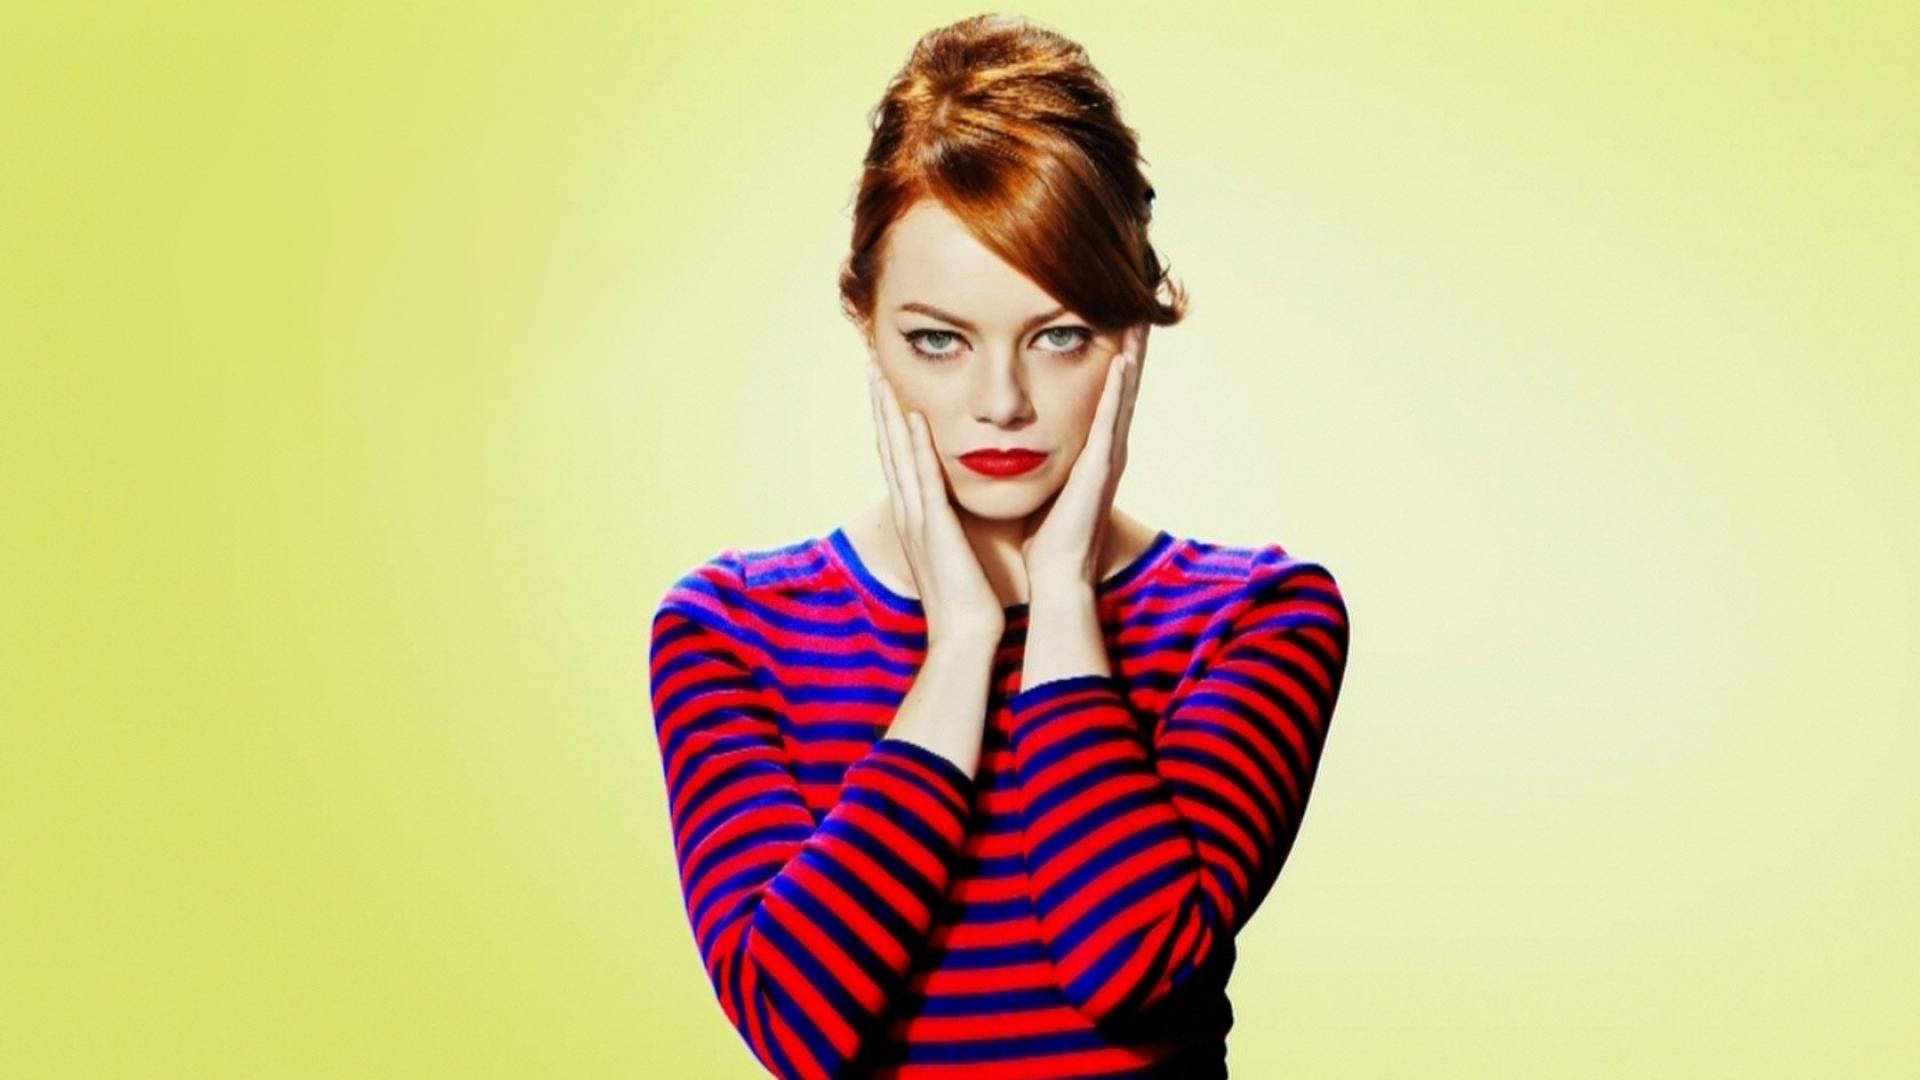 Emma Stone Looking Stunning In Retro Style. Background